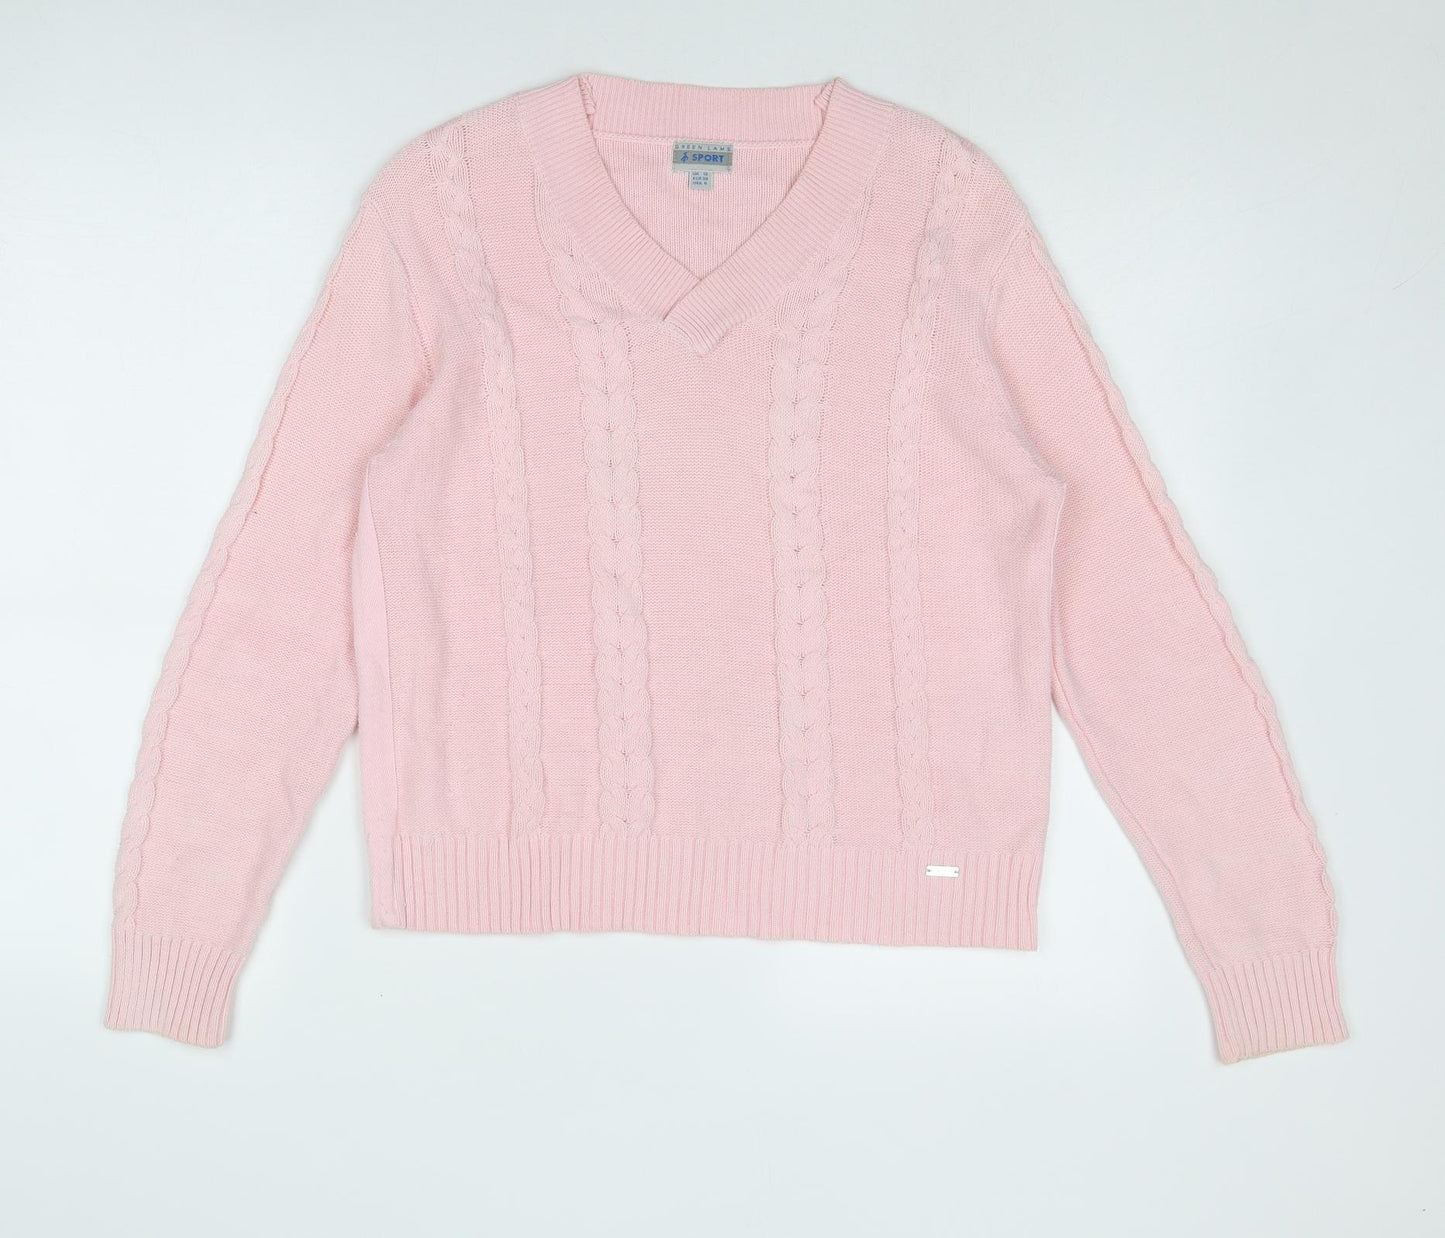 Green Lamb Womens Pink V-Neck Cotton Pullover Jumper Size 12